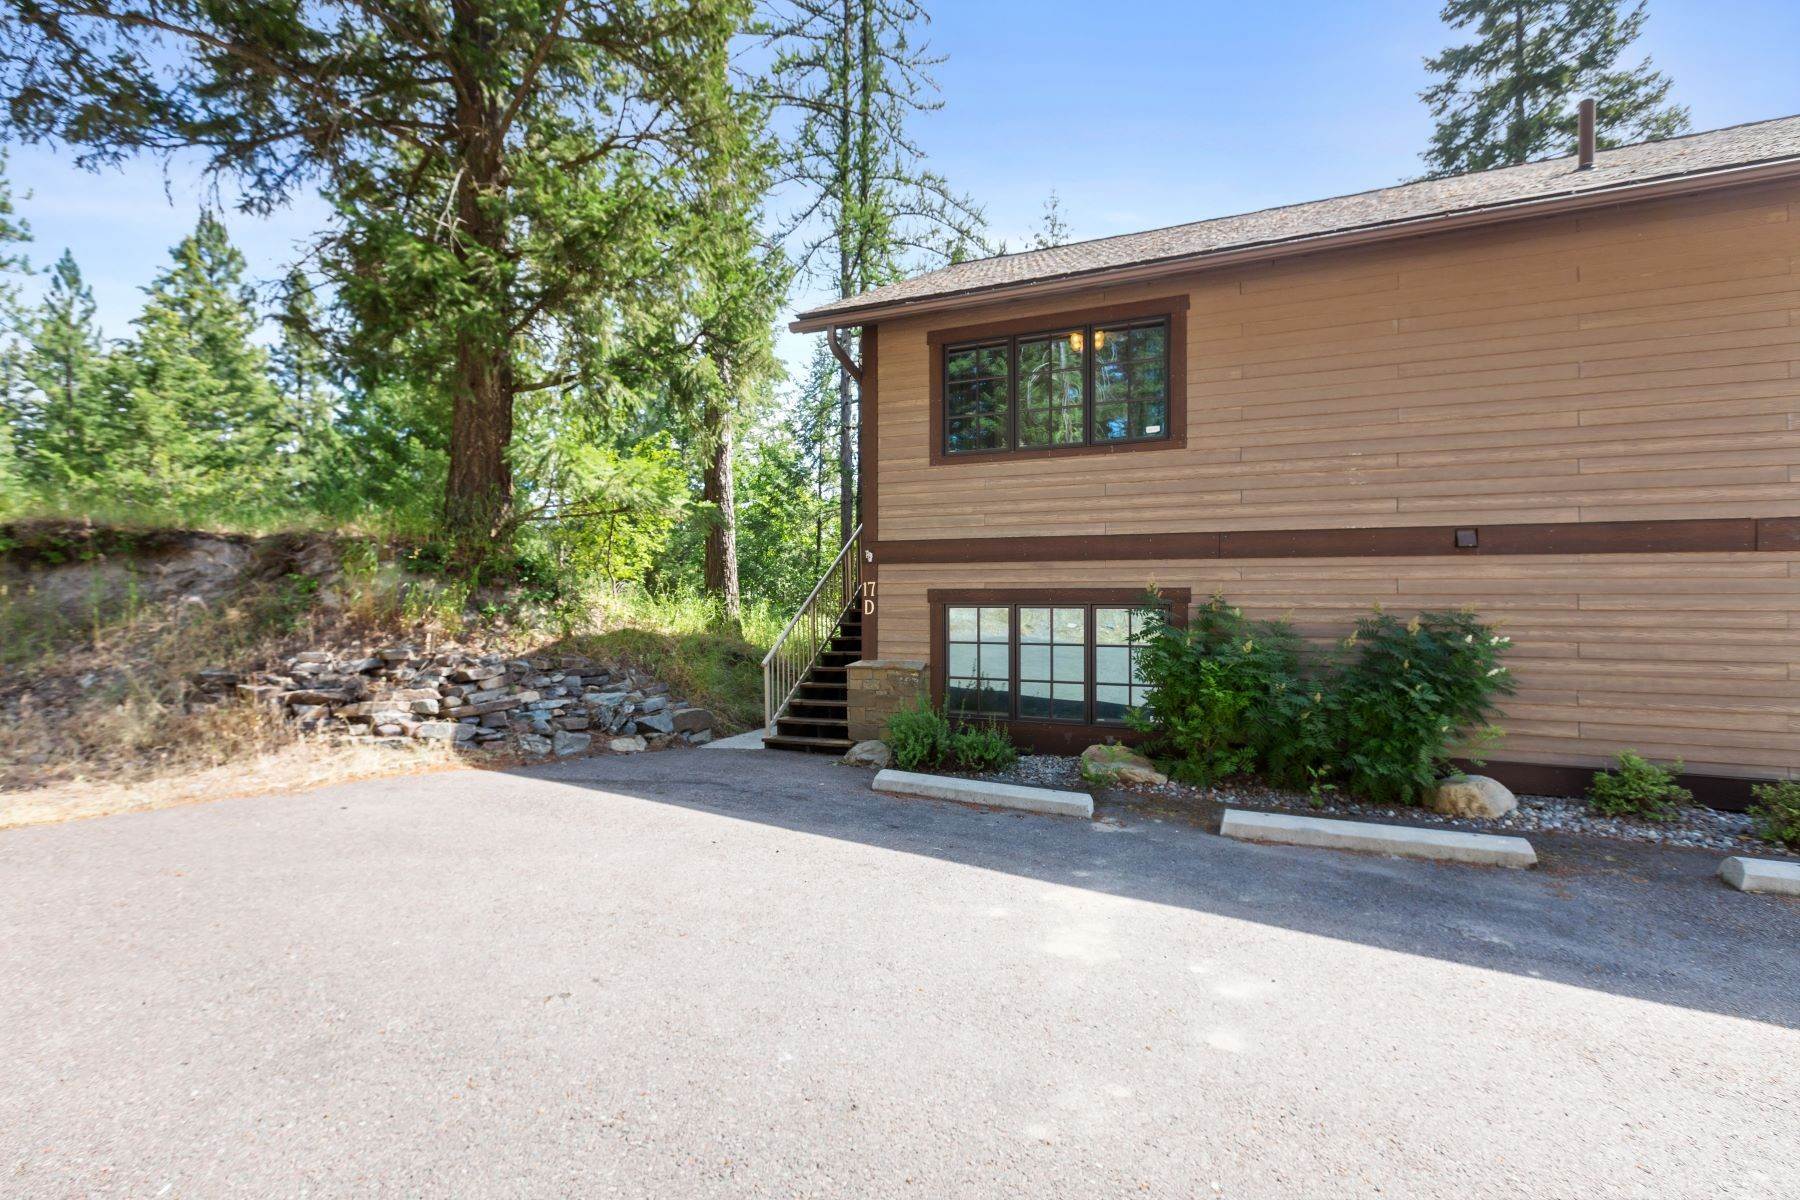 12. Condominiums for Sale at 300 Bay Point Drive, Whitefish, Montana 59937 United States